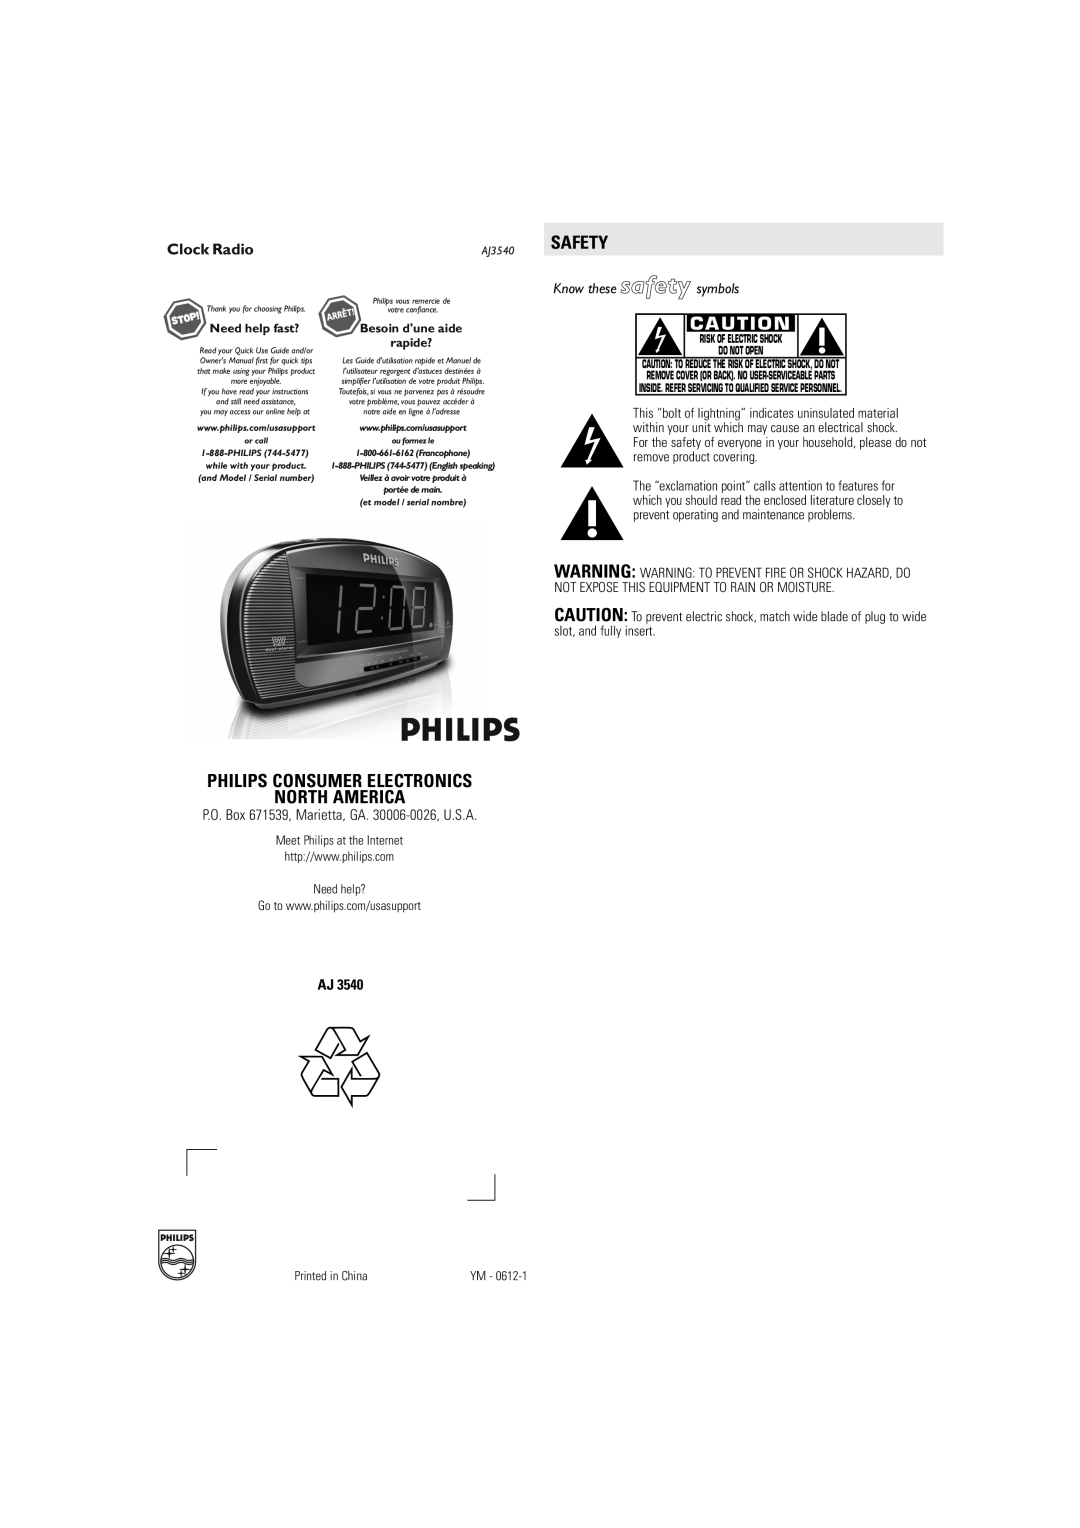 Philips AJ3540s user service Safety, Philips Consumer Electronics North America, Clock Radio, Know these safety symbols 